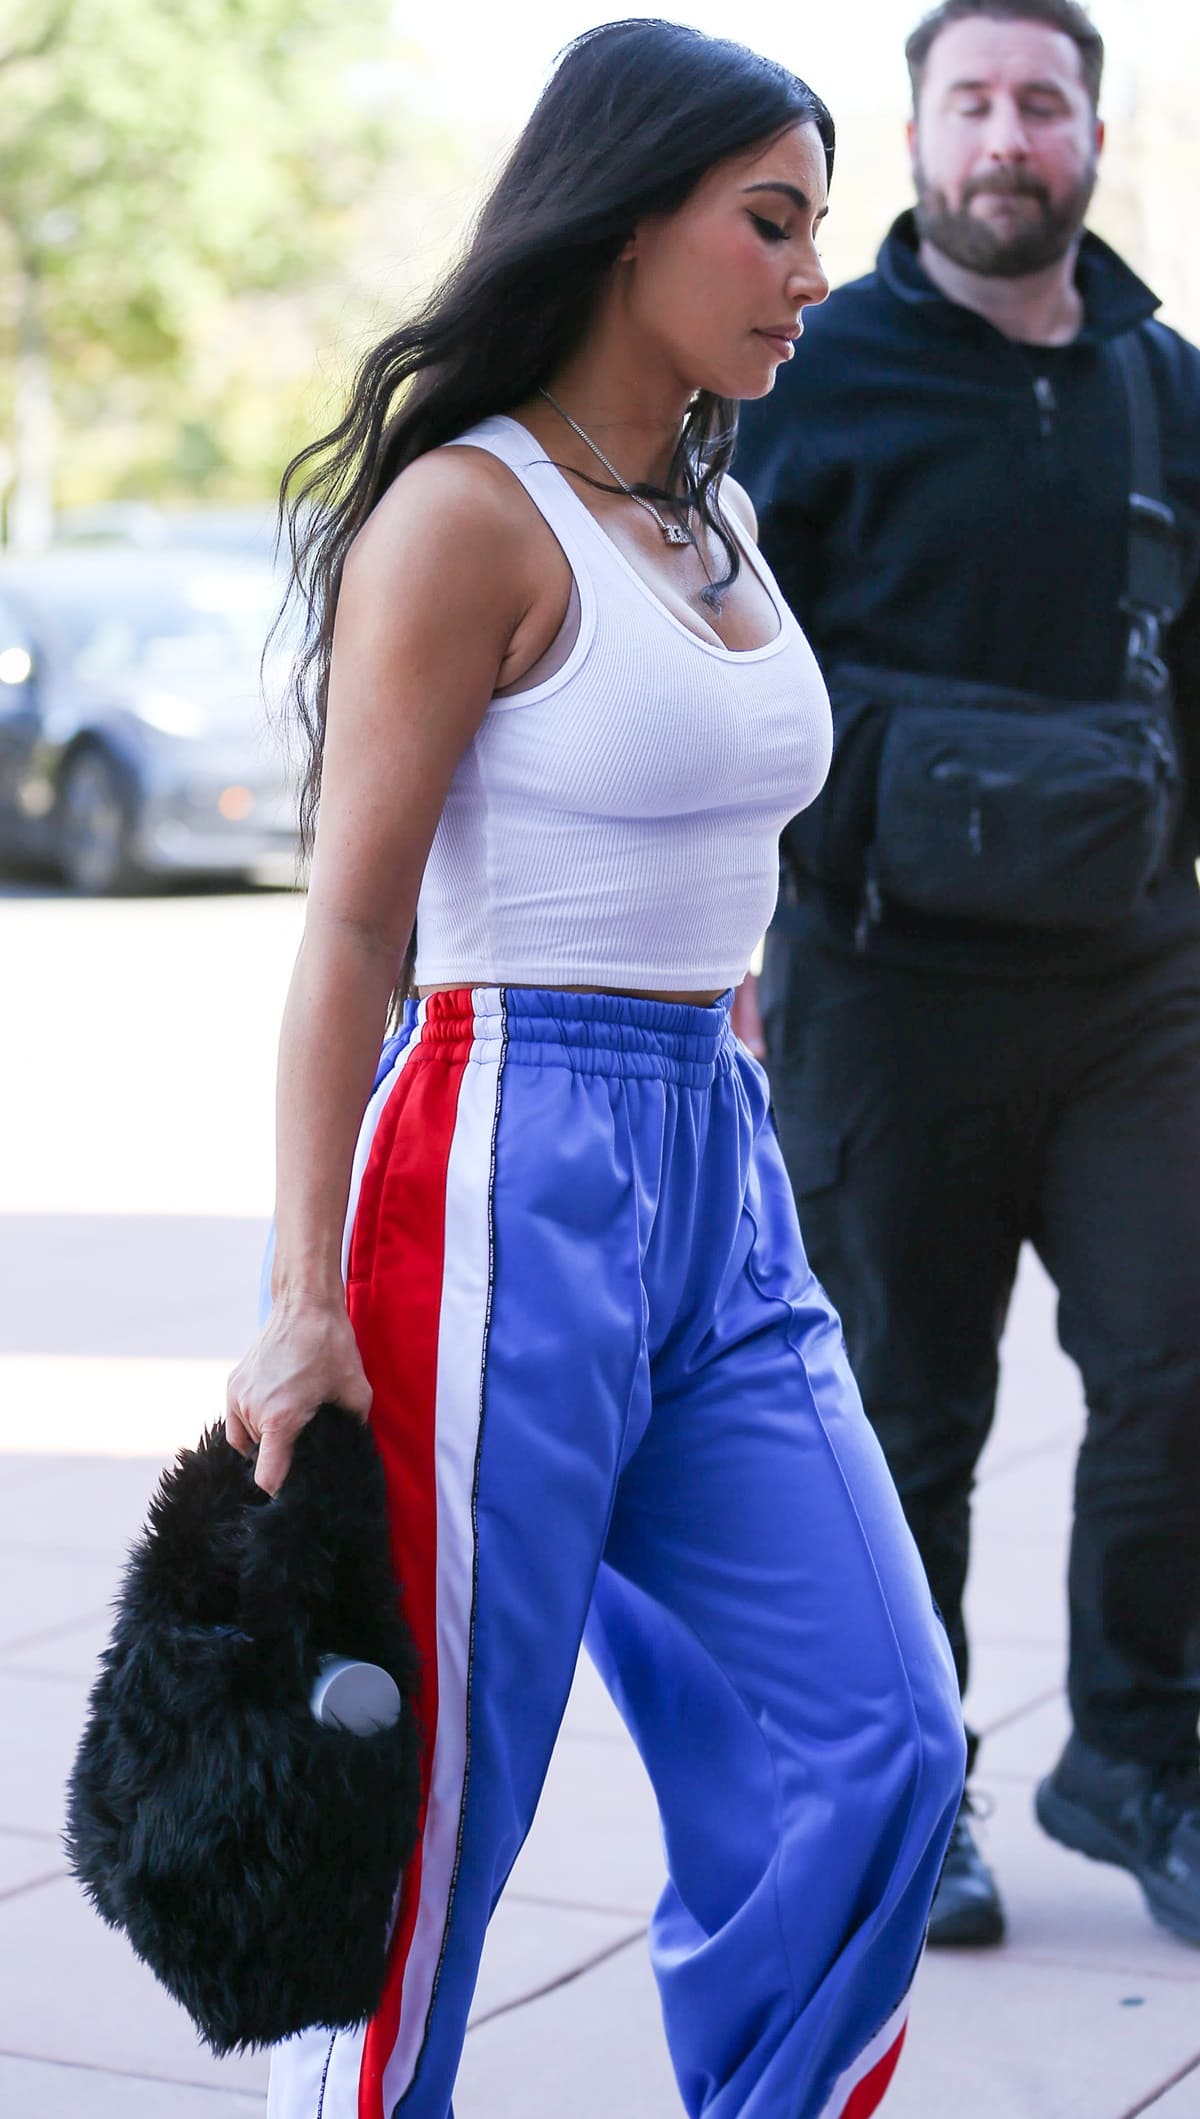 Kim Kardashian flaunted her midriff in a form-fitting white tank top paired with loose blue track pants with red and white stripes running down the sides